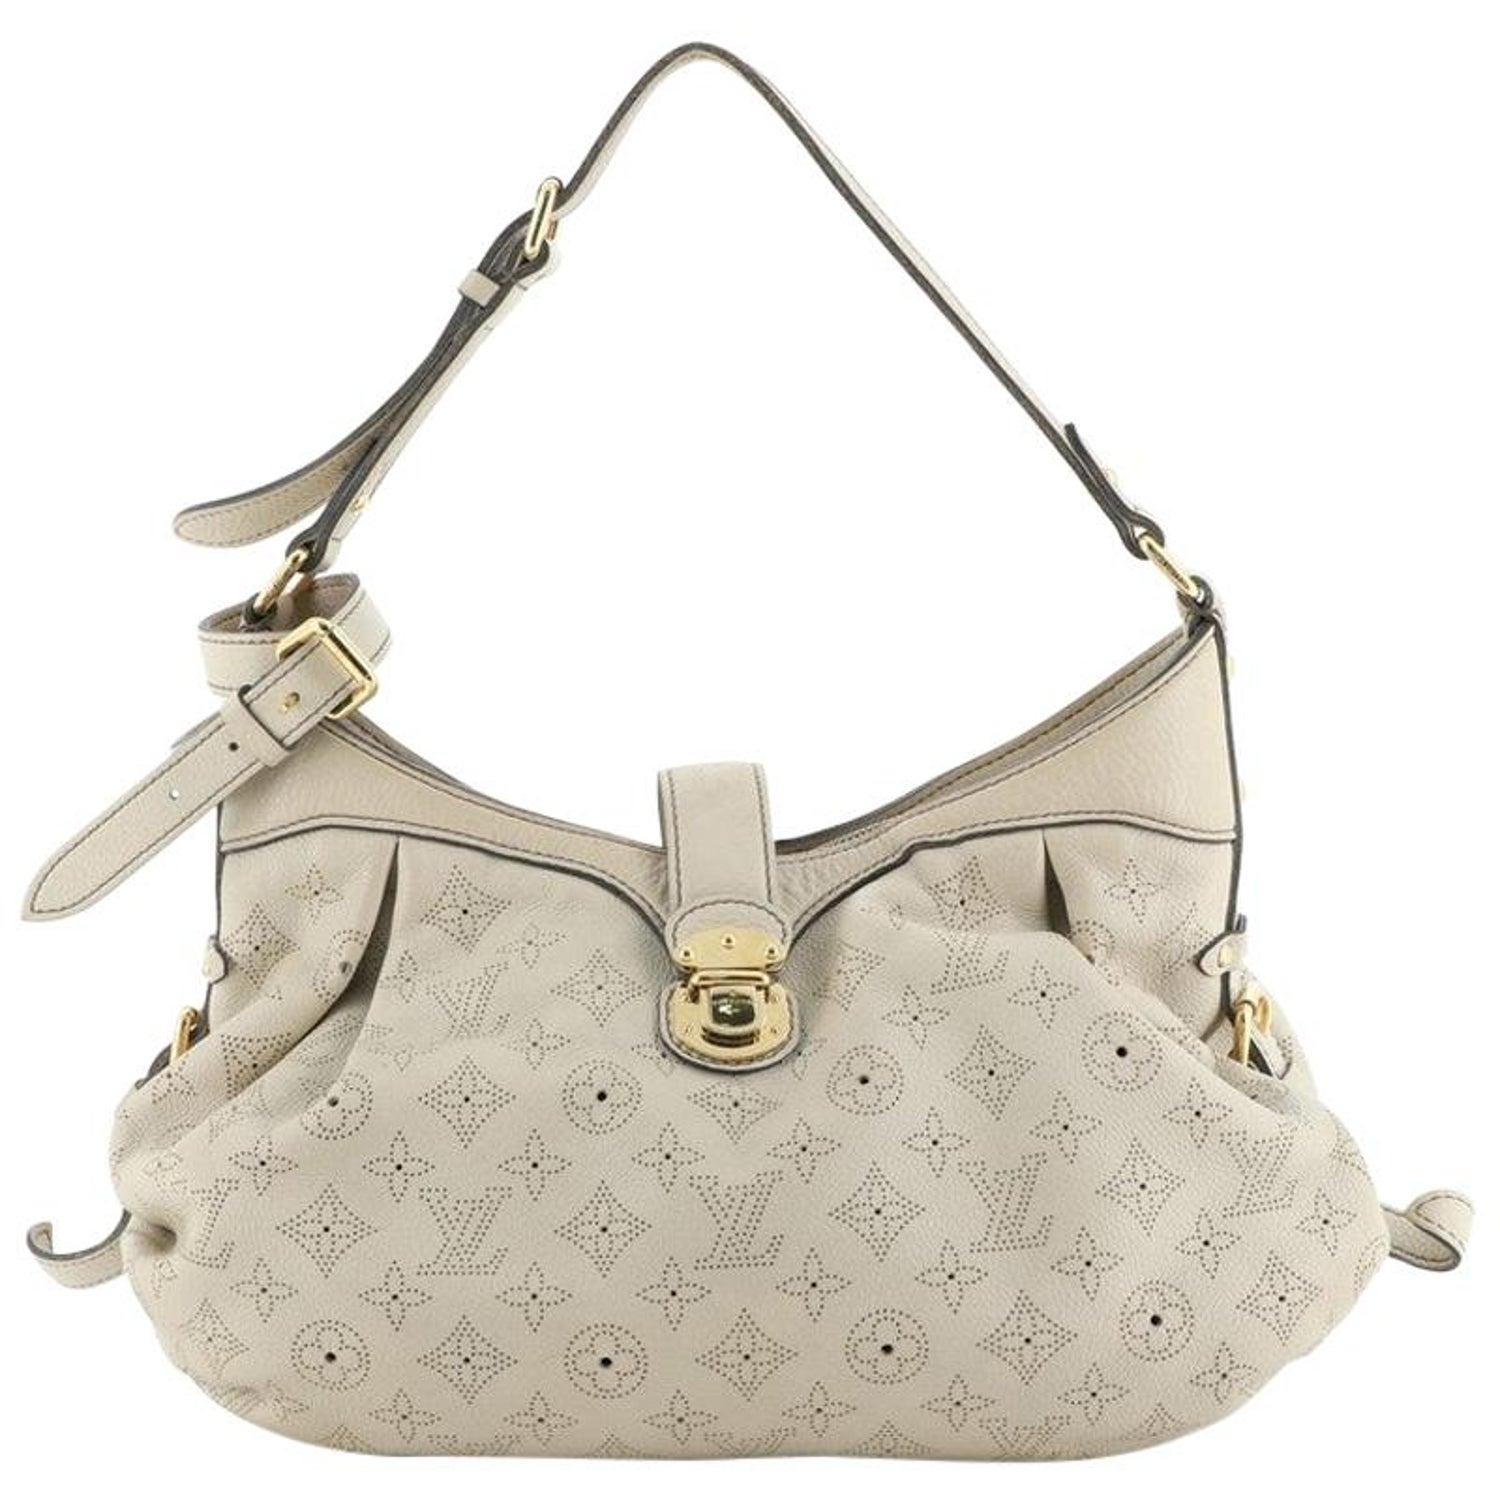 Louis Vuitton Christopher Xs - For Sale on 1stDibs